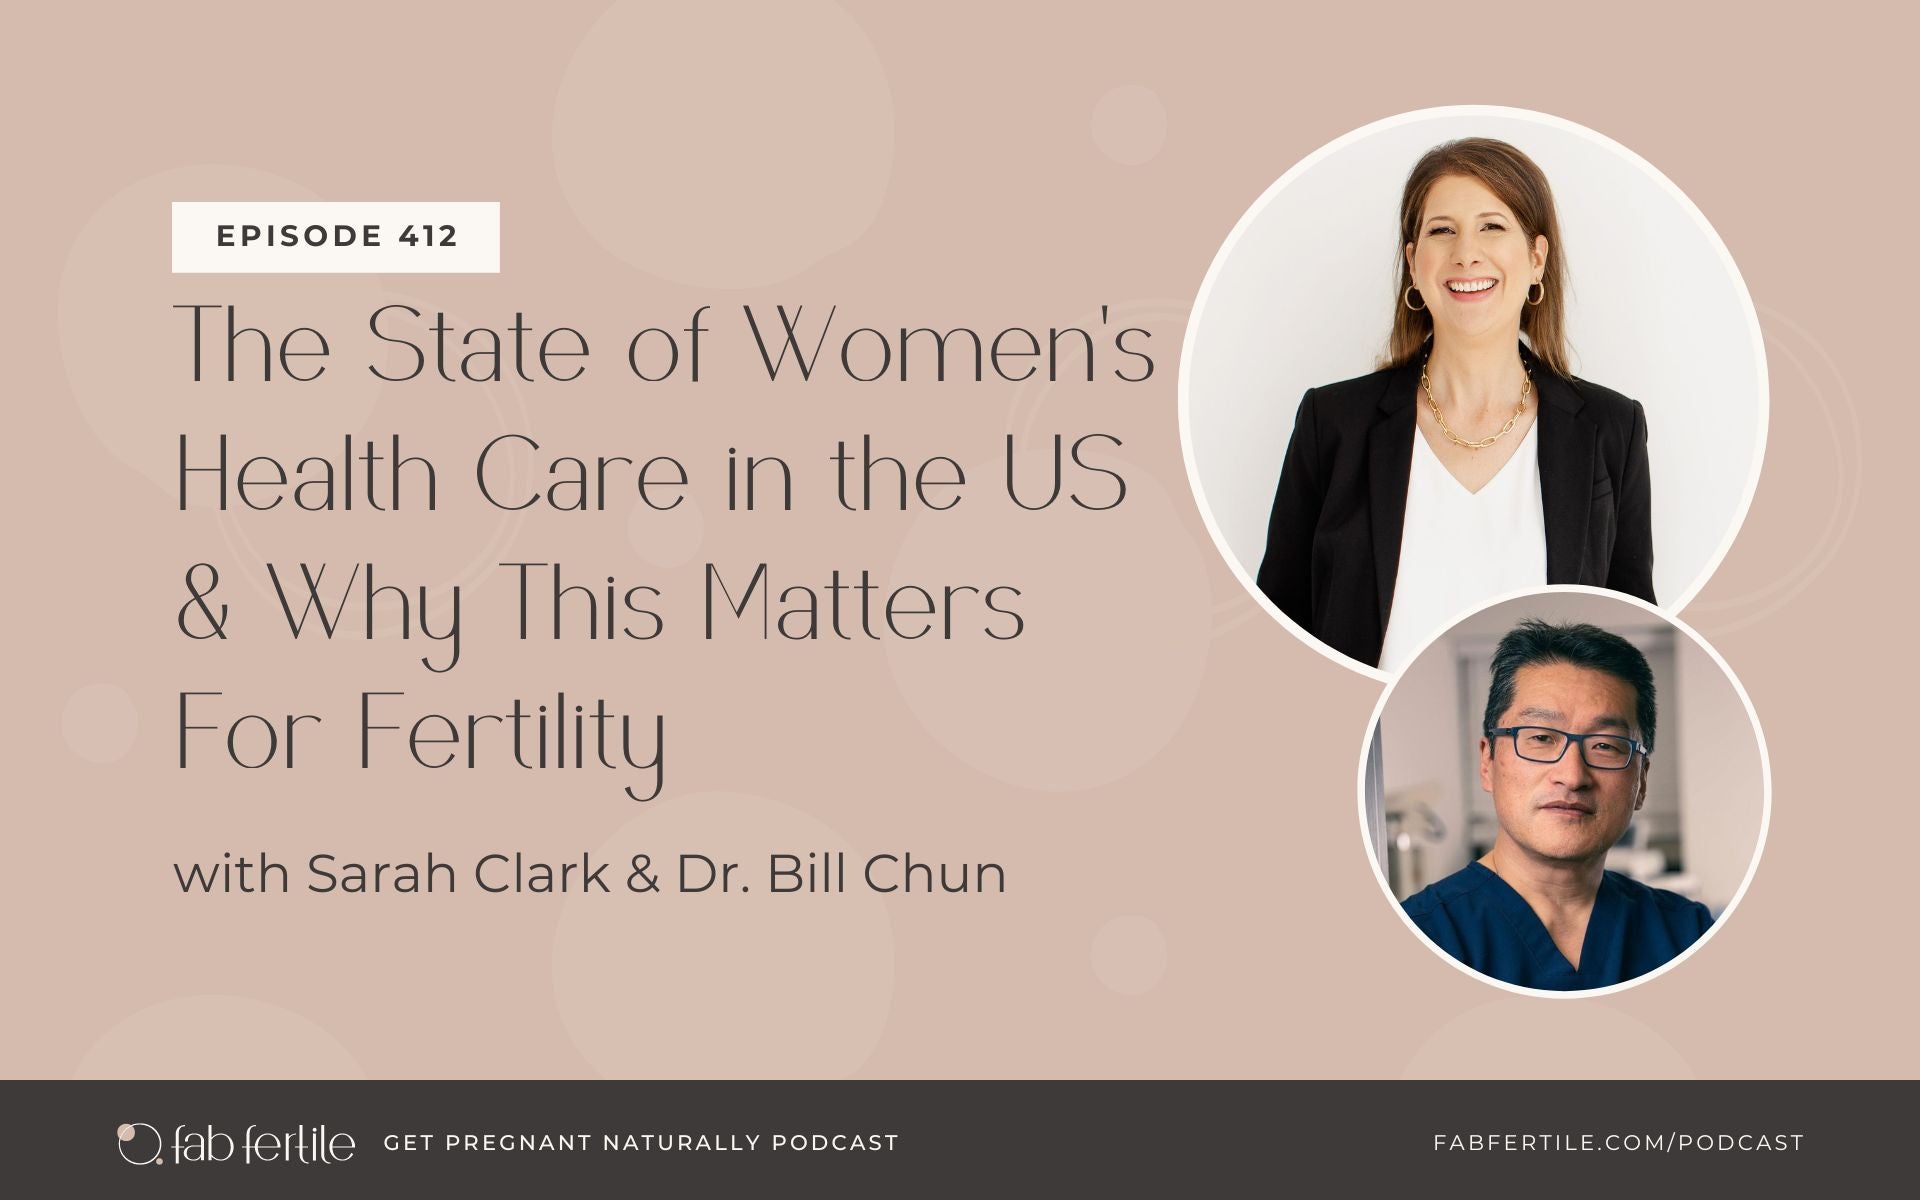 The State of Women's Health Care in the US and Why This Matters For Fertility with Dr. Bill Chun